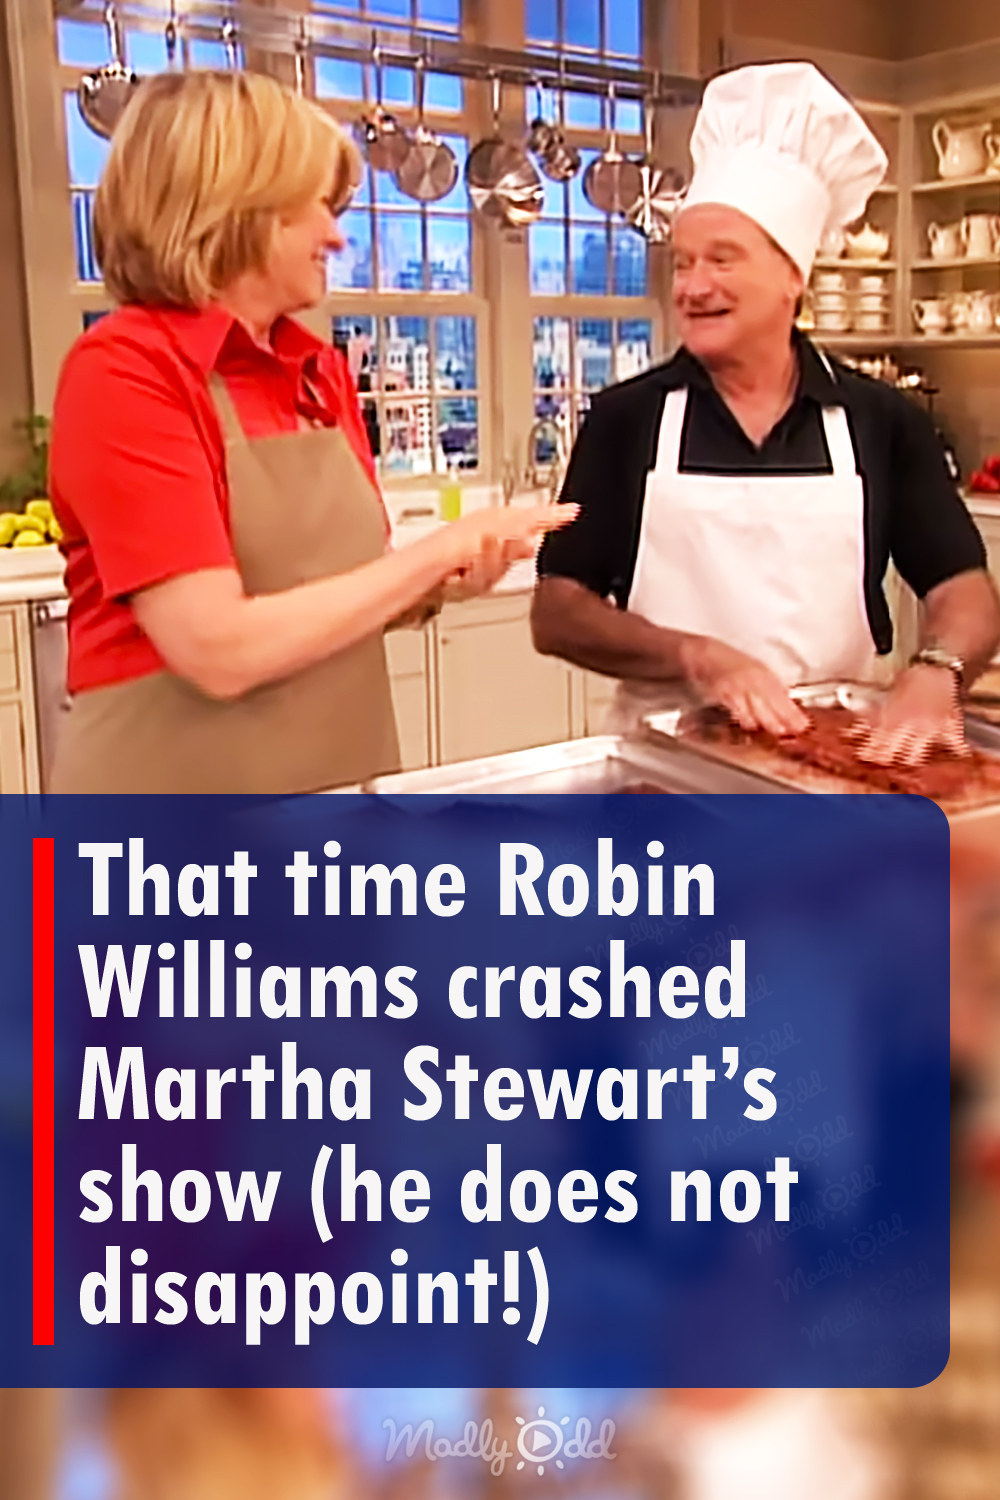 That time Robin Williams crashed Martha Stewart’s show (he does not disappoint!)